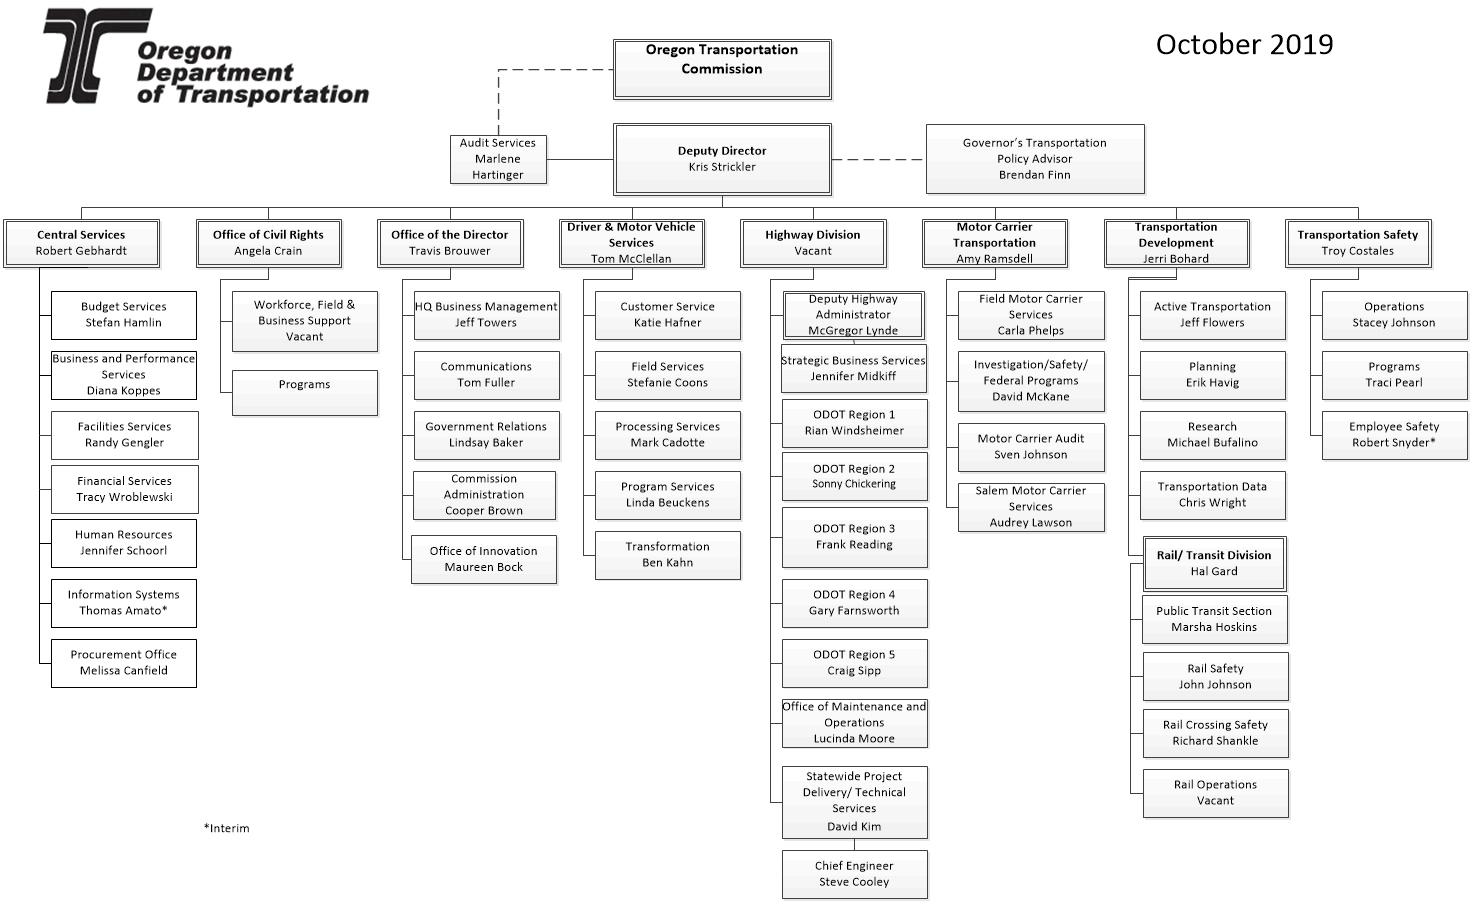 Dot Organizational Chart With Names: A Visual Reference of Charts ...